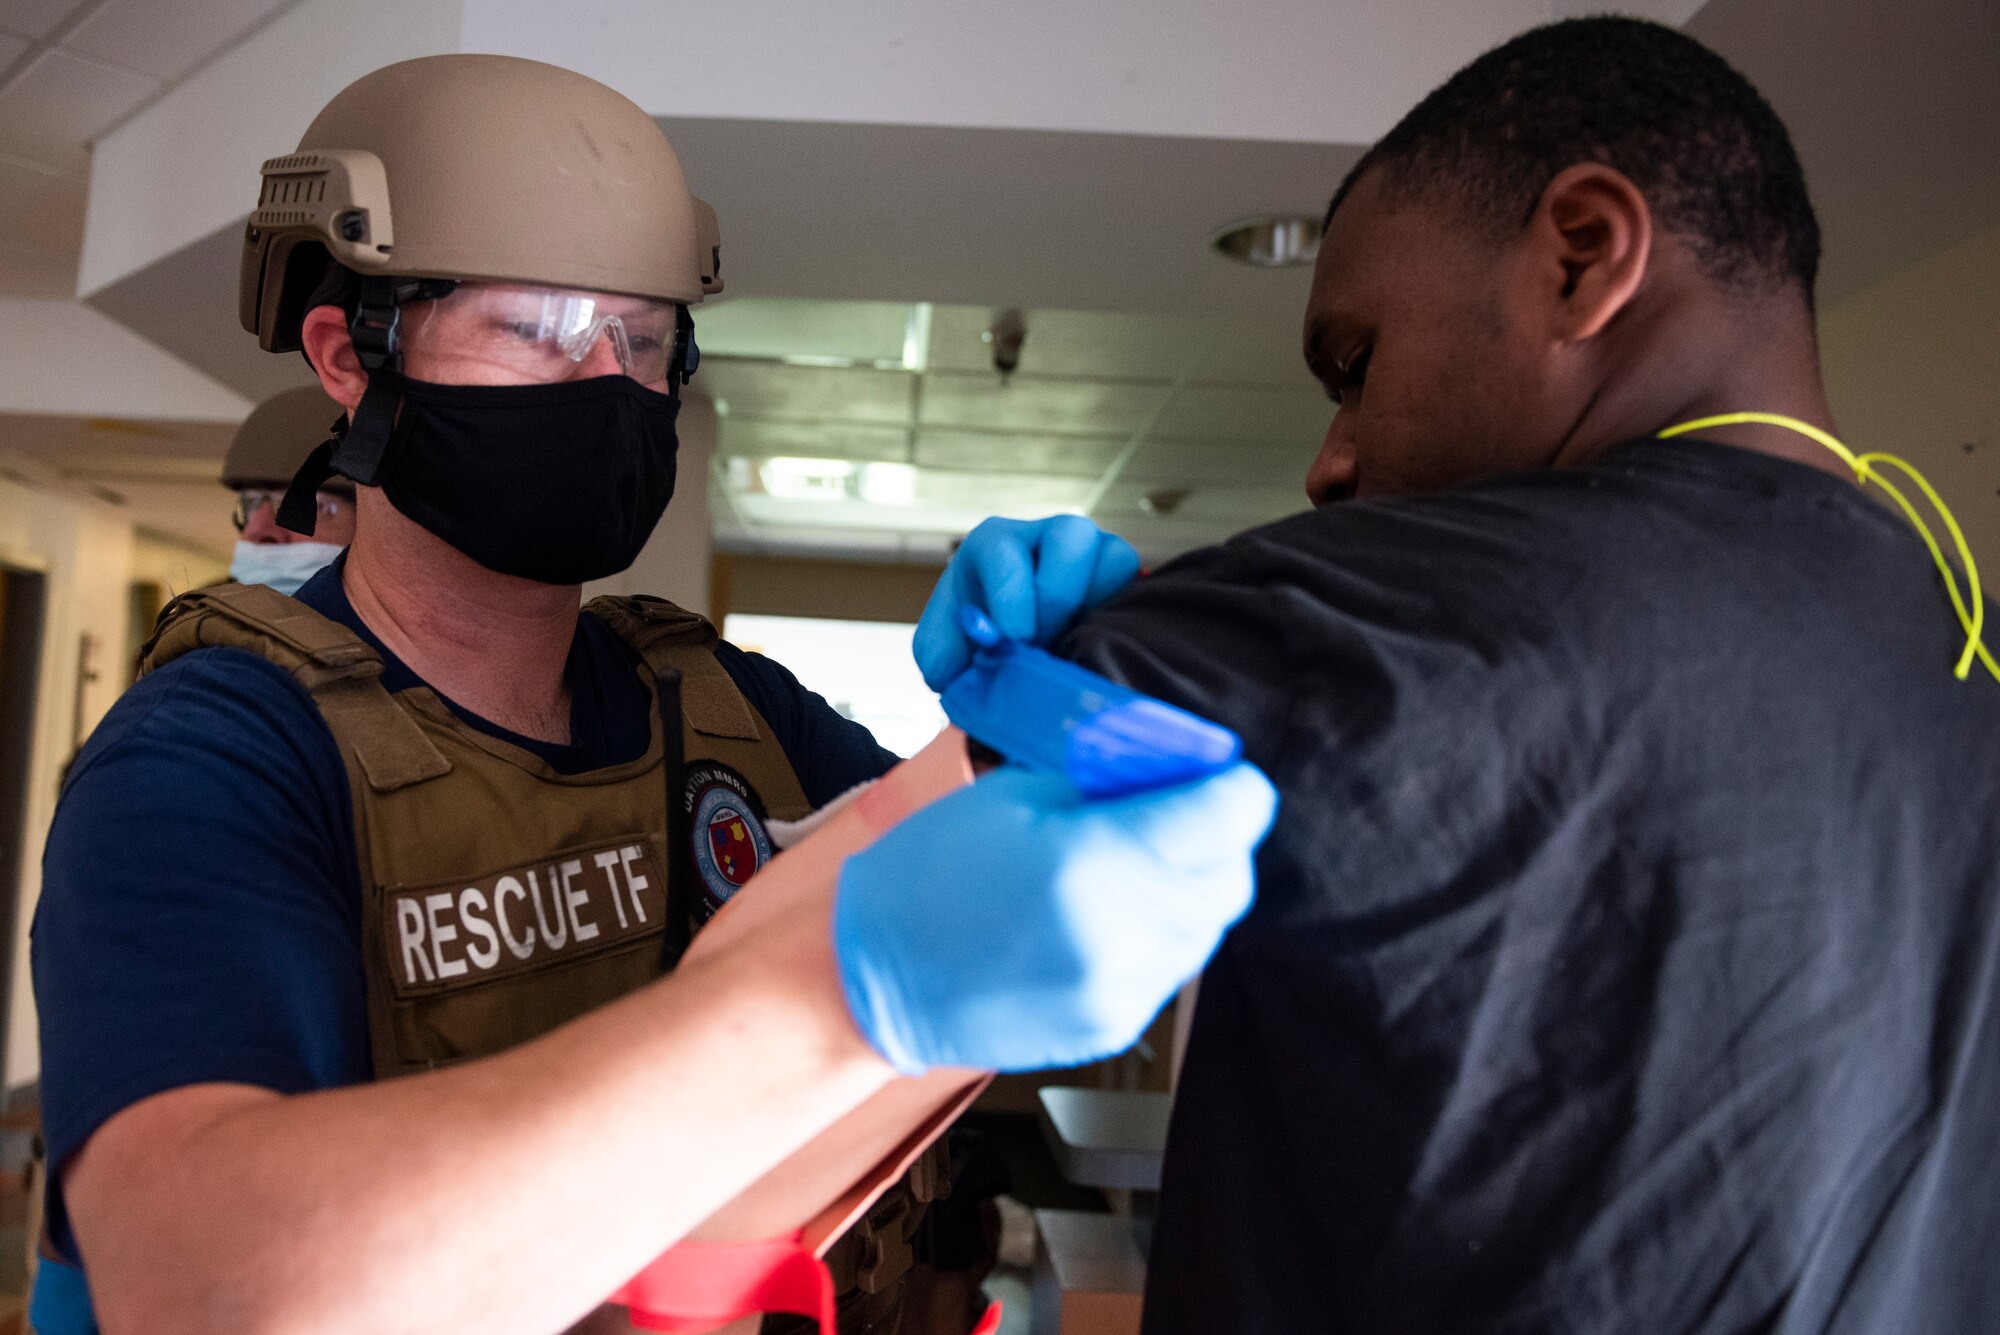 A paramedic from the 788th Civil Engineer Group Fire Department loosely places a tourniquet on the arm of a role-player with a simulated injury during an active shooter exercise, Aug. 18, 2021 at Wright-Patterson Air Force Base, Ohio. Readiness exercises are routinely held to streamline unit cohesion when responding to emergencies. (U.S. Air Force photo by Wesley Farnsworth)